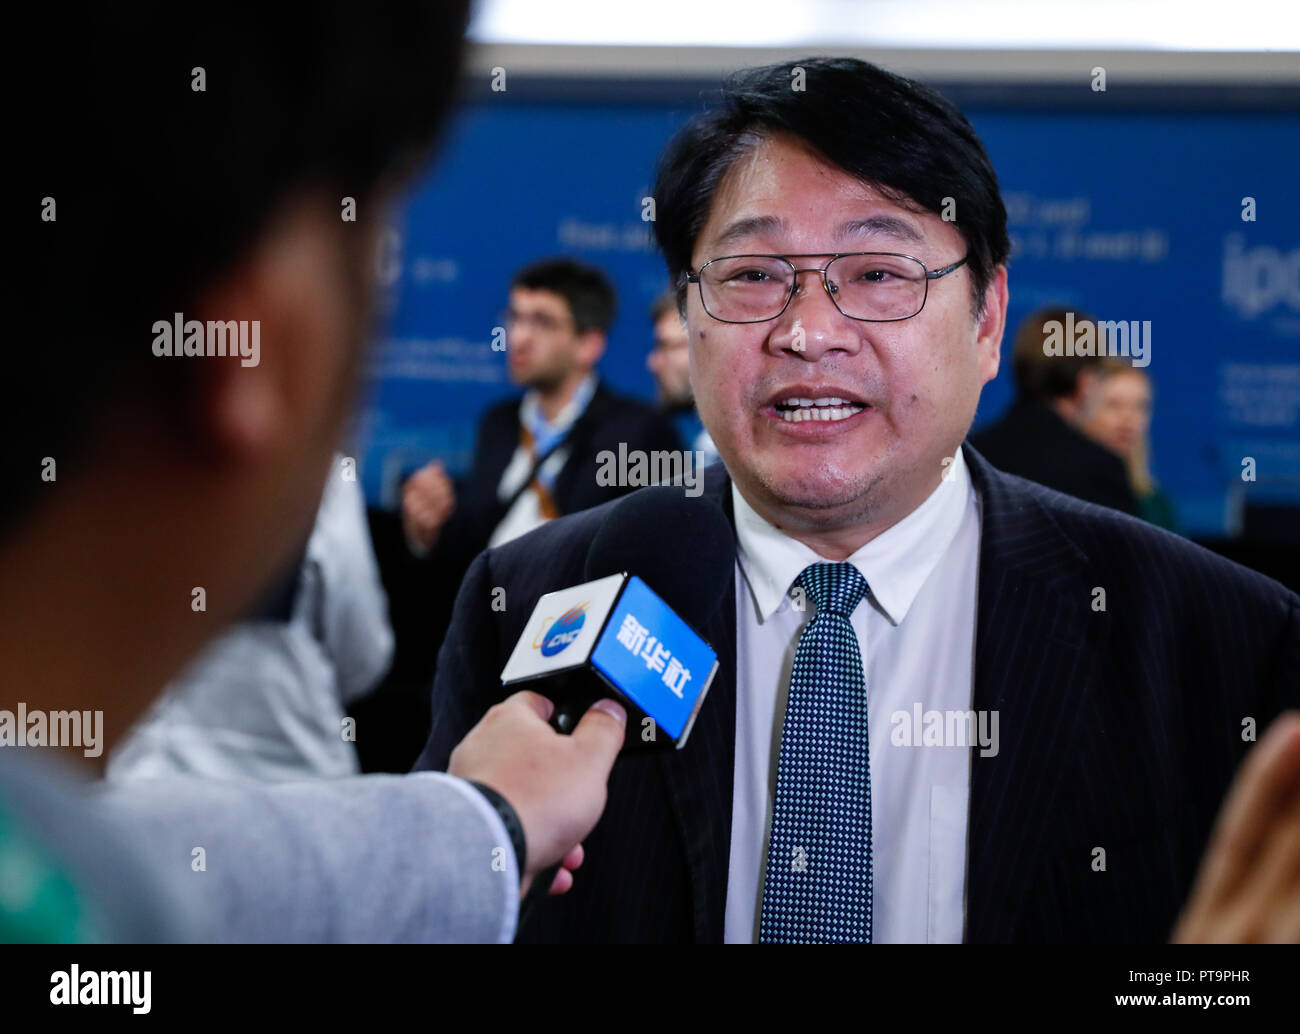 Incheon, IPCC in South Korea's western port city of Incheon. 8th Oct, 2018. Zhai Panmao, co-chair of Intergovernmental Panel on Climate Change (IPCC) Working Group, receives interview after a press conference of the 48th session of IPCC in South Korea's western port city of Incheon, Oct. 8, 2018. The IPCC, an international body assessing the science related to climate change, on Monday urged 'rapid and far-reaching' changes in all aspects of the entire world to fight against global warming after adopting a special report on global warming. Credit: Wang Jingqiang/Xinhua/Alamy Live News Stock Photo